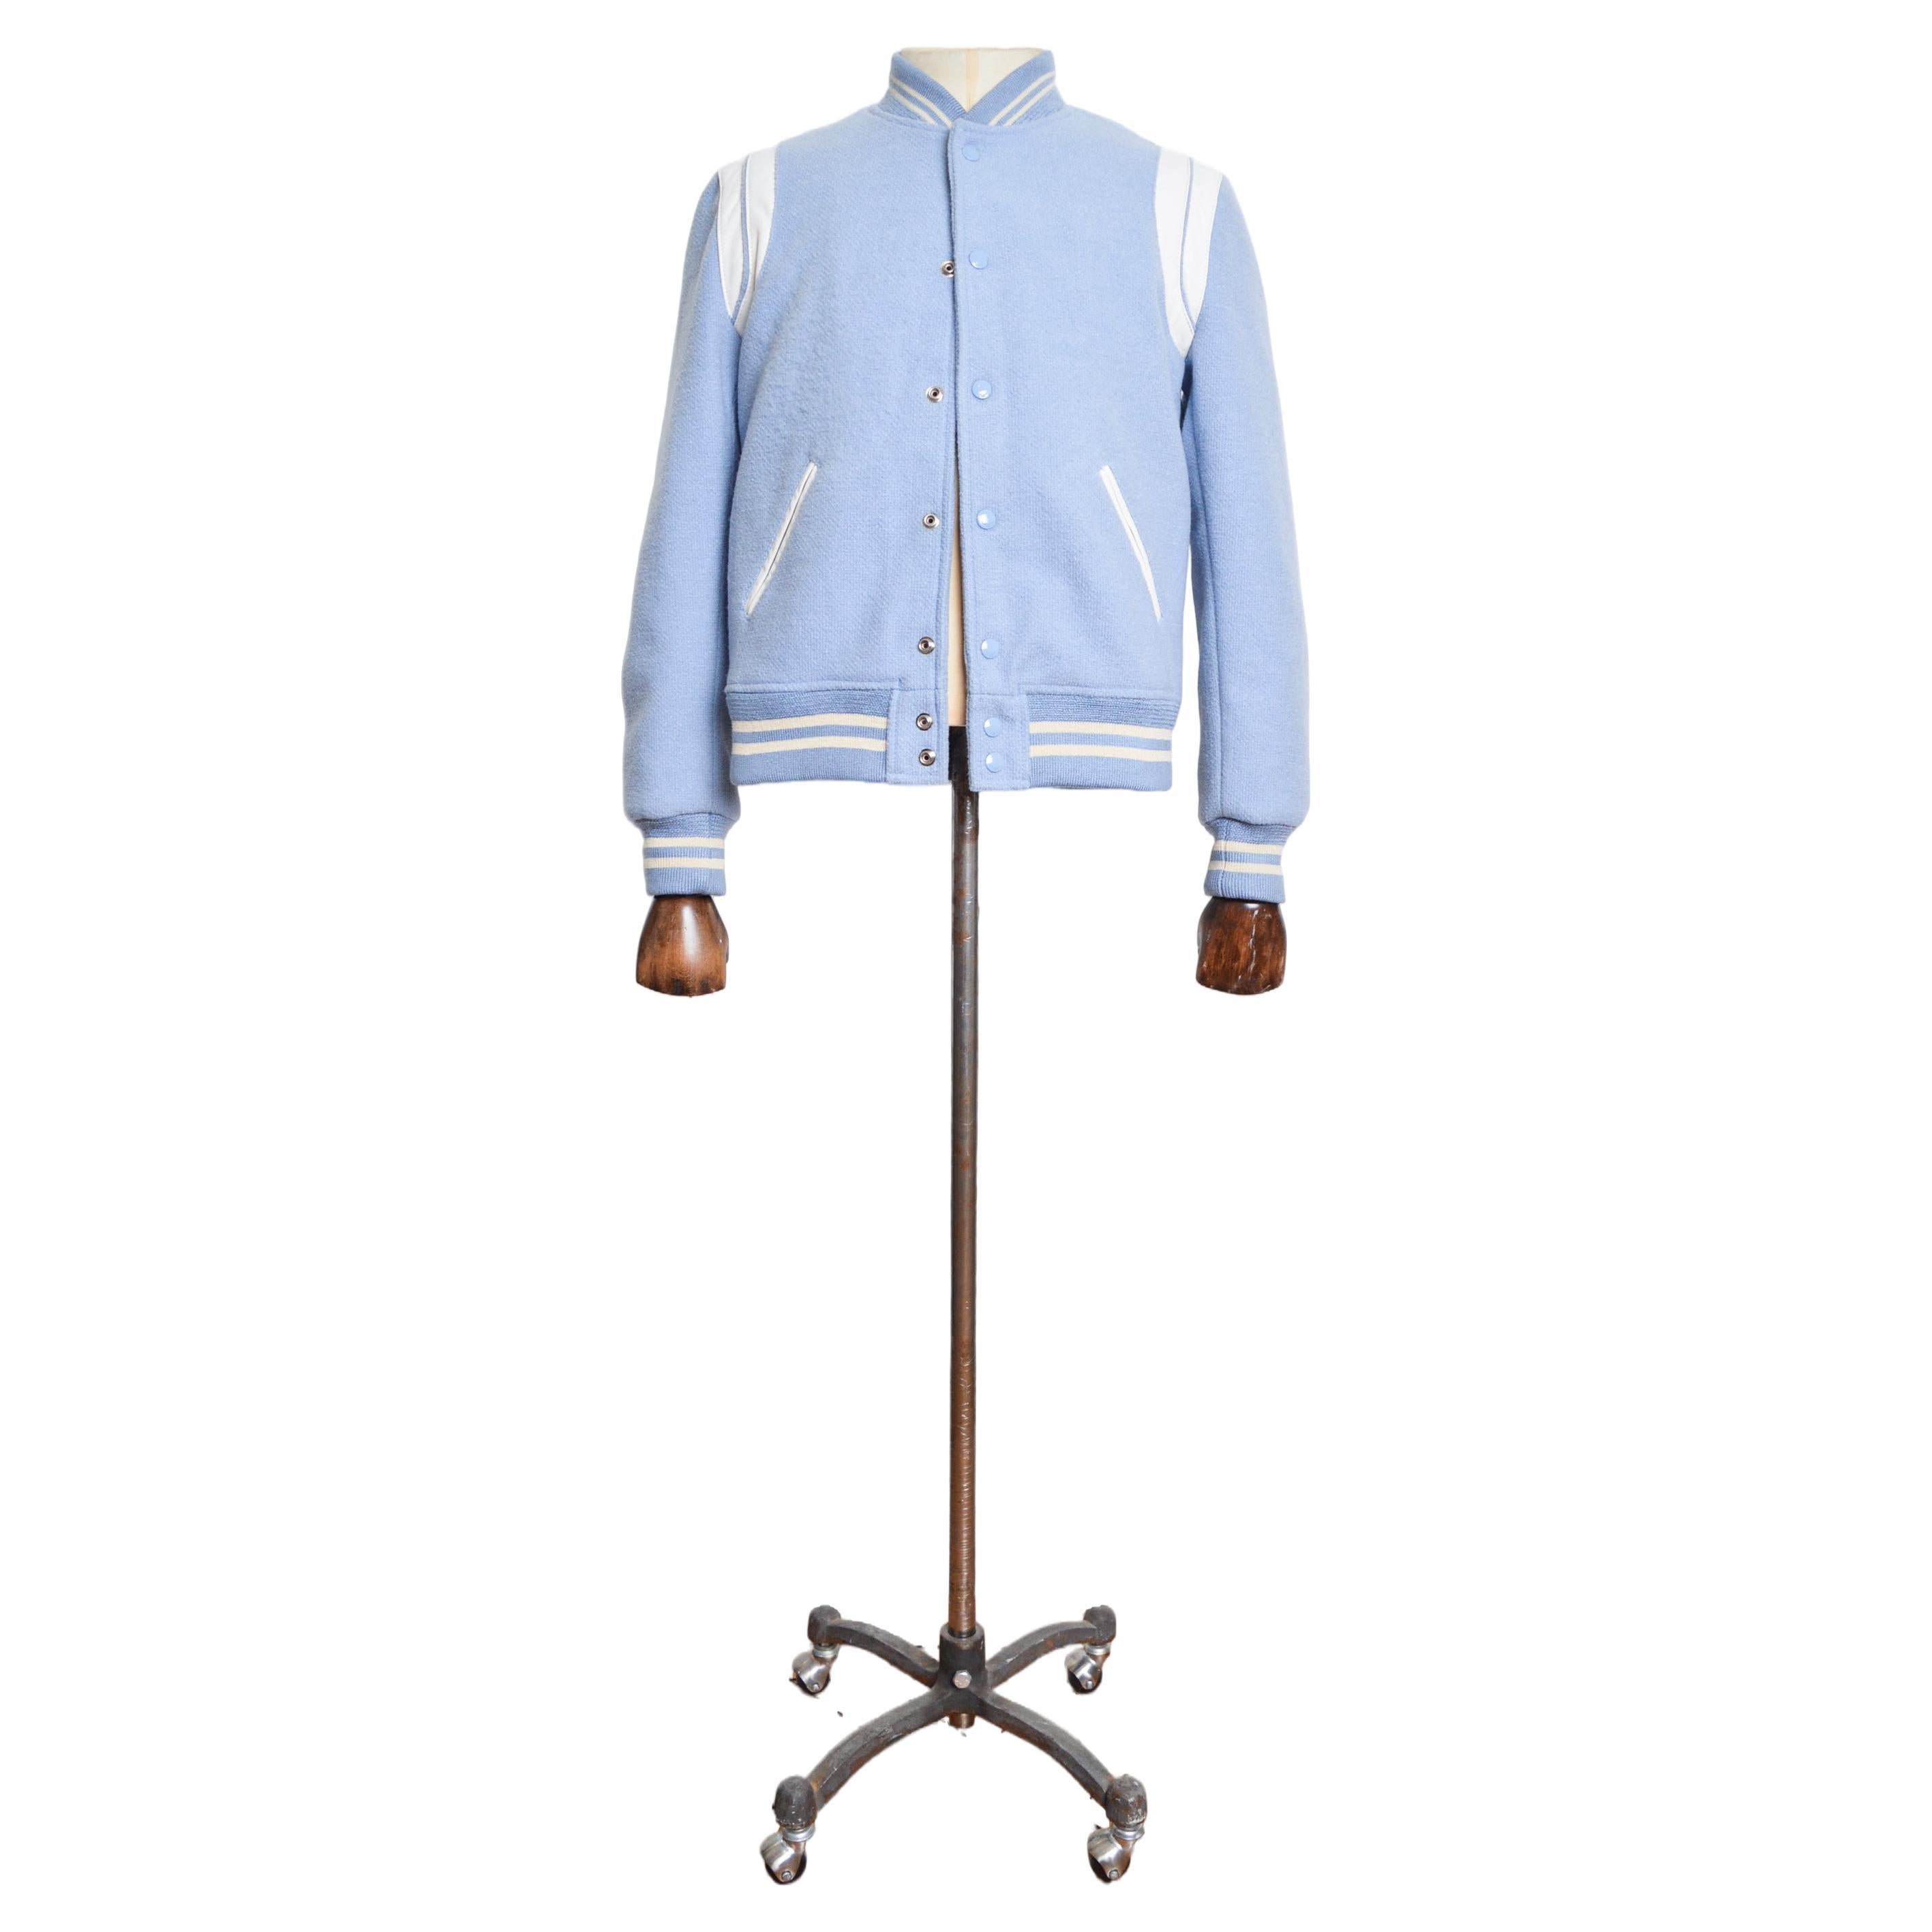 Highly sought after SS/ 2016 SAINT LAURENT baby blue 'Teddy' Bomber jacket.

MADE IN ITALY.  

Features: Rounded neckline, Long sleeves, Press stud closure, elasticated wrist cuffs, collar and waistband, Black acetate interior lining, White lamb